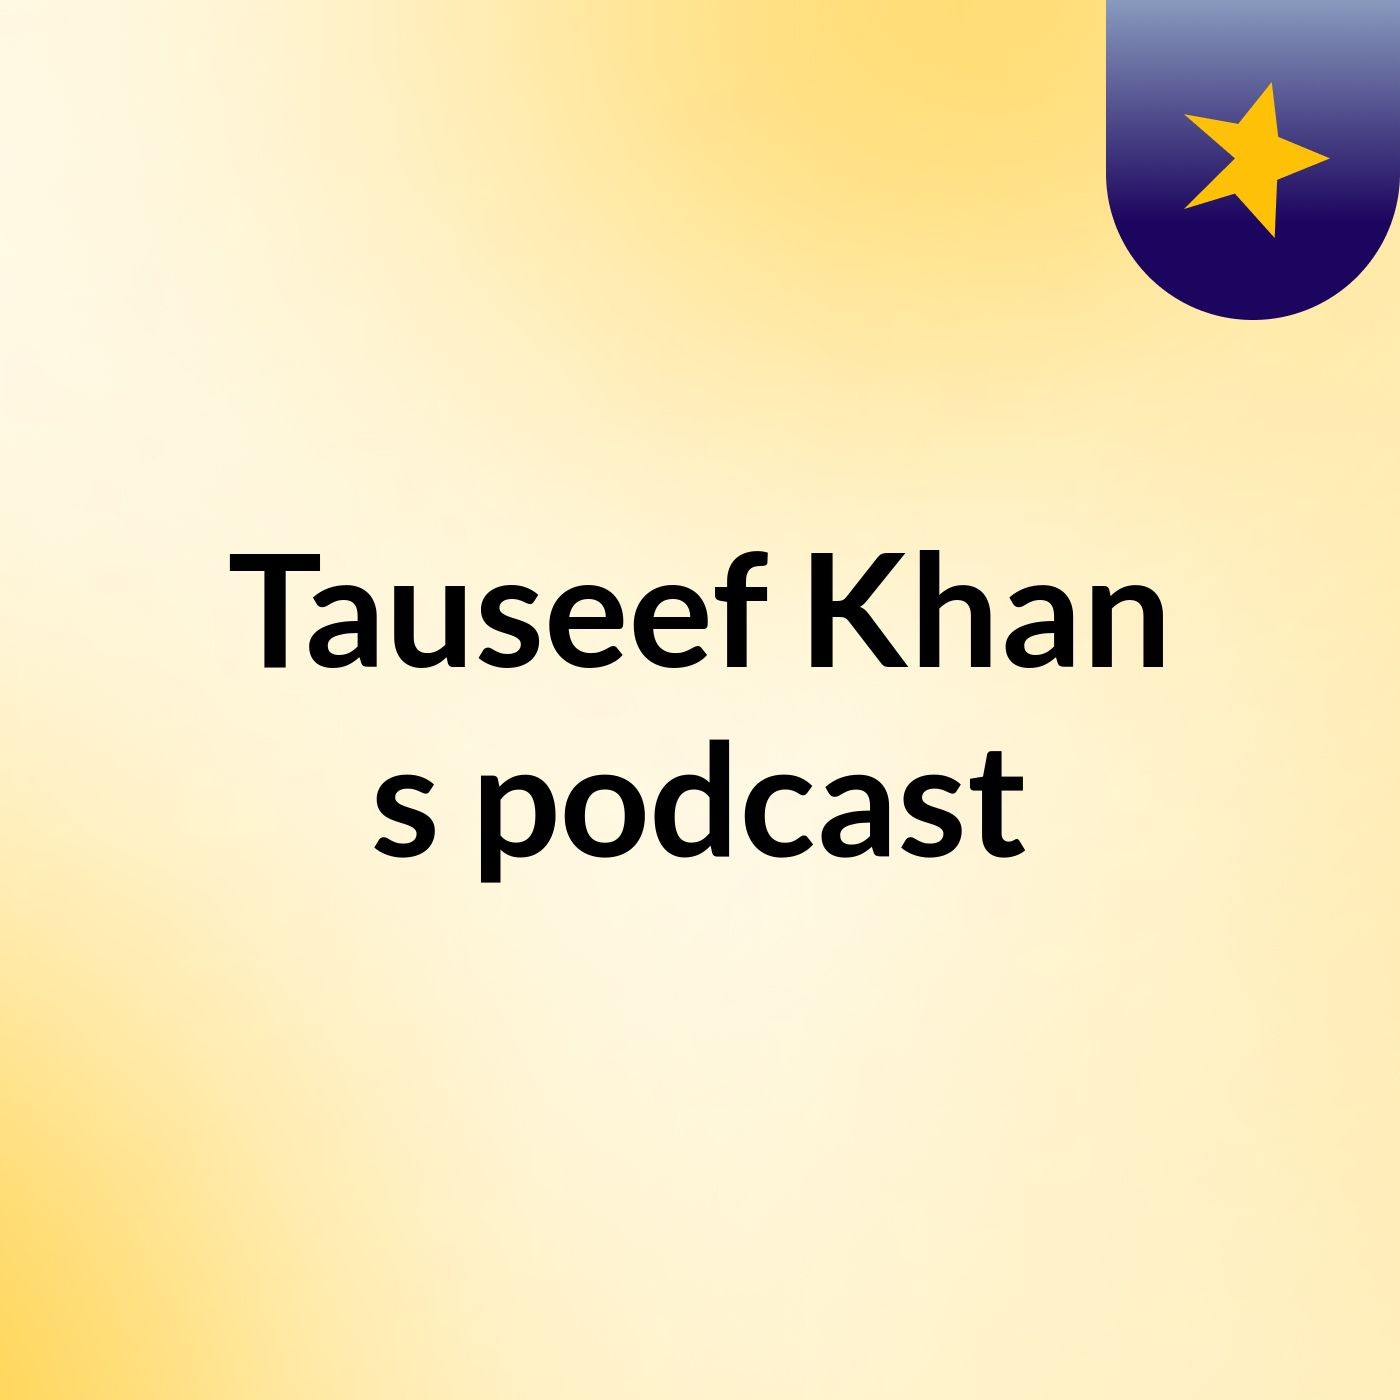 Tauseef Khan's podcast